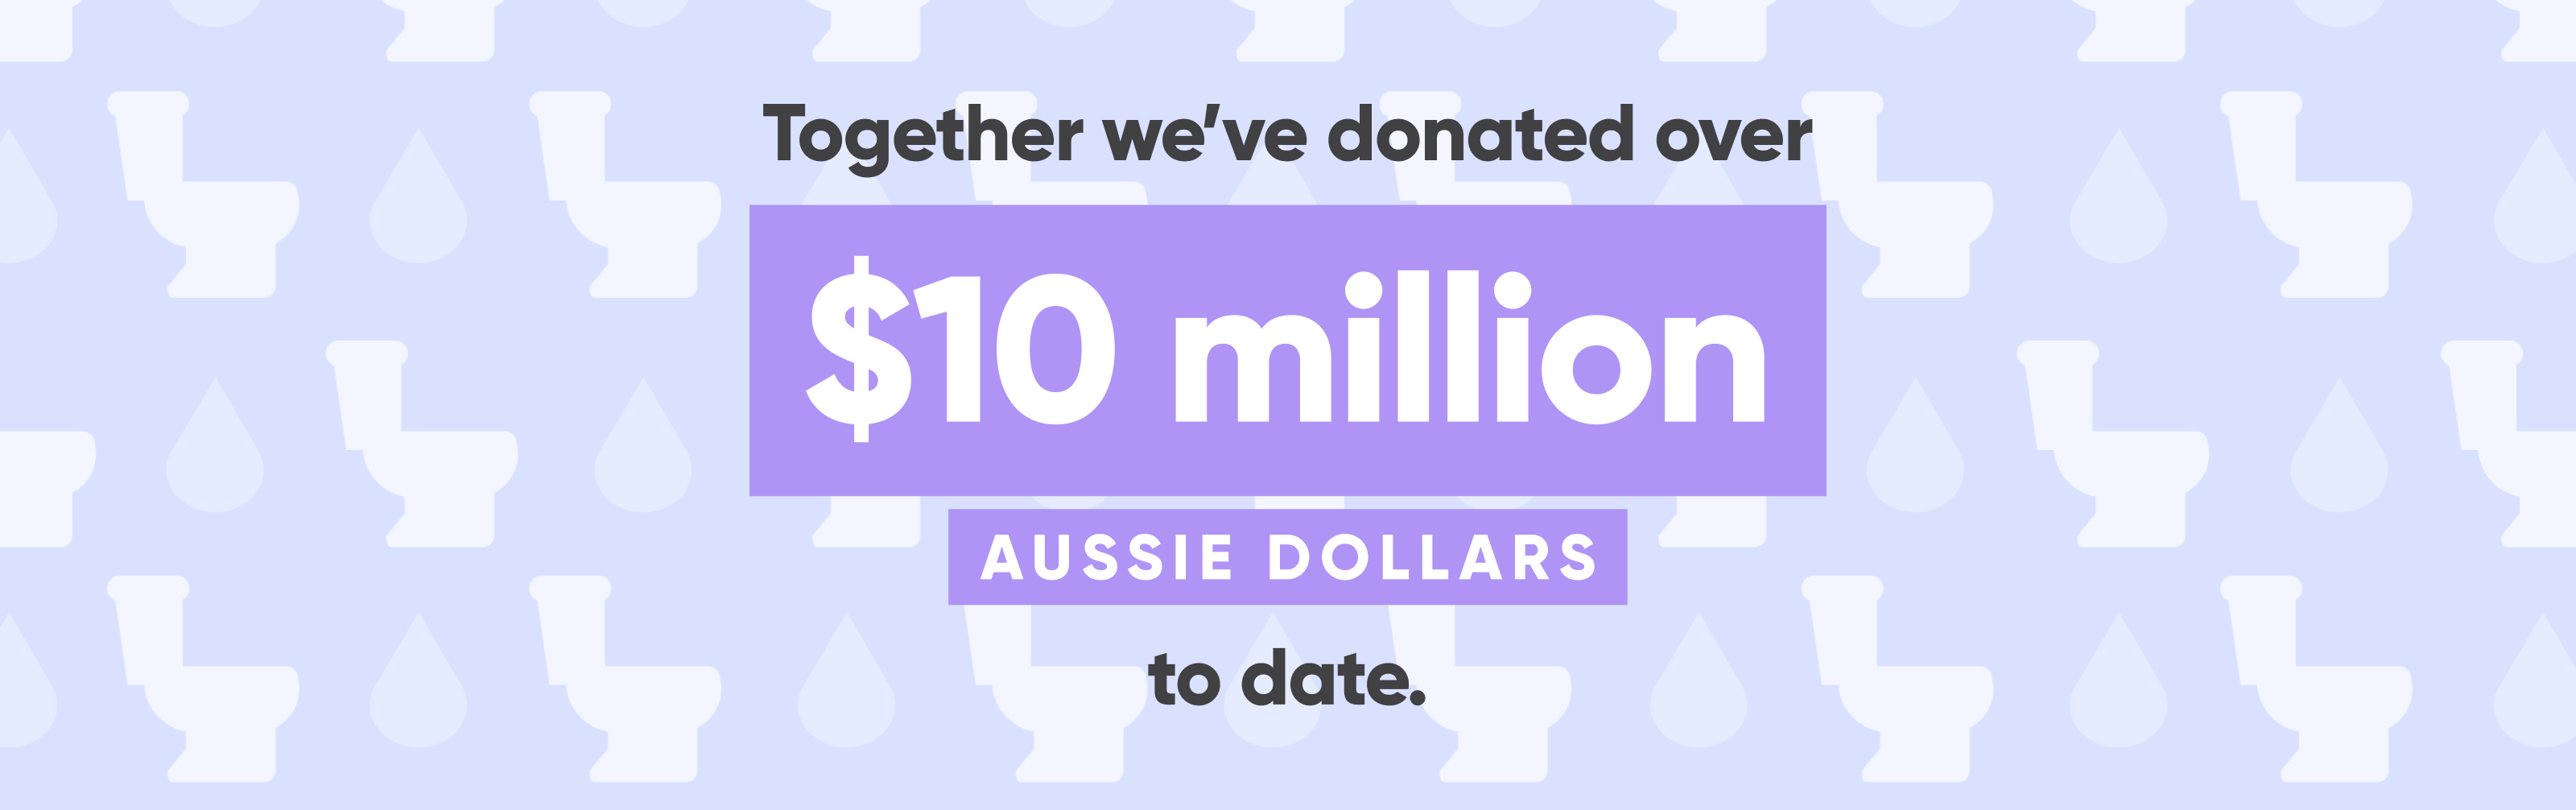 Together, we've donated over $10 Aussie Dollars to date.